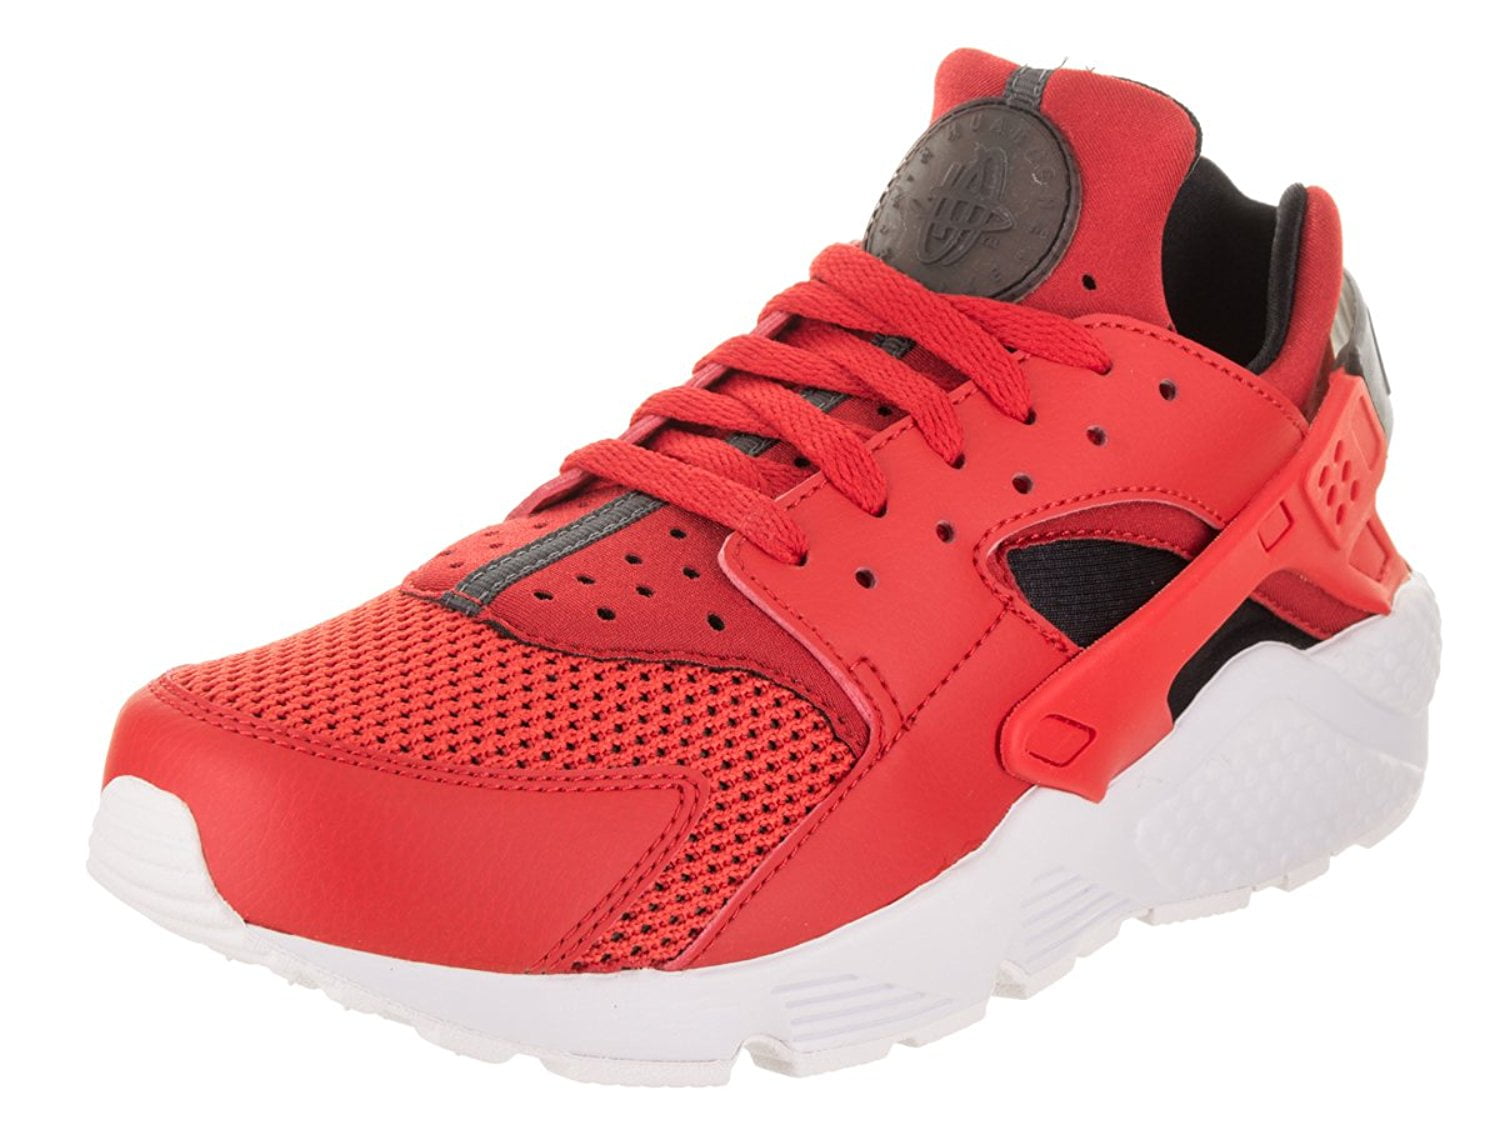 Men Air Huarache Sport Shoes Sneakers Athletic Shoes white red 